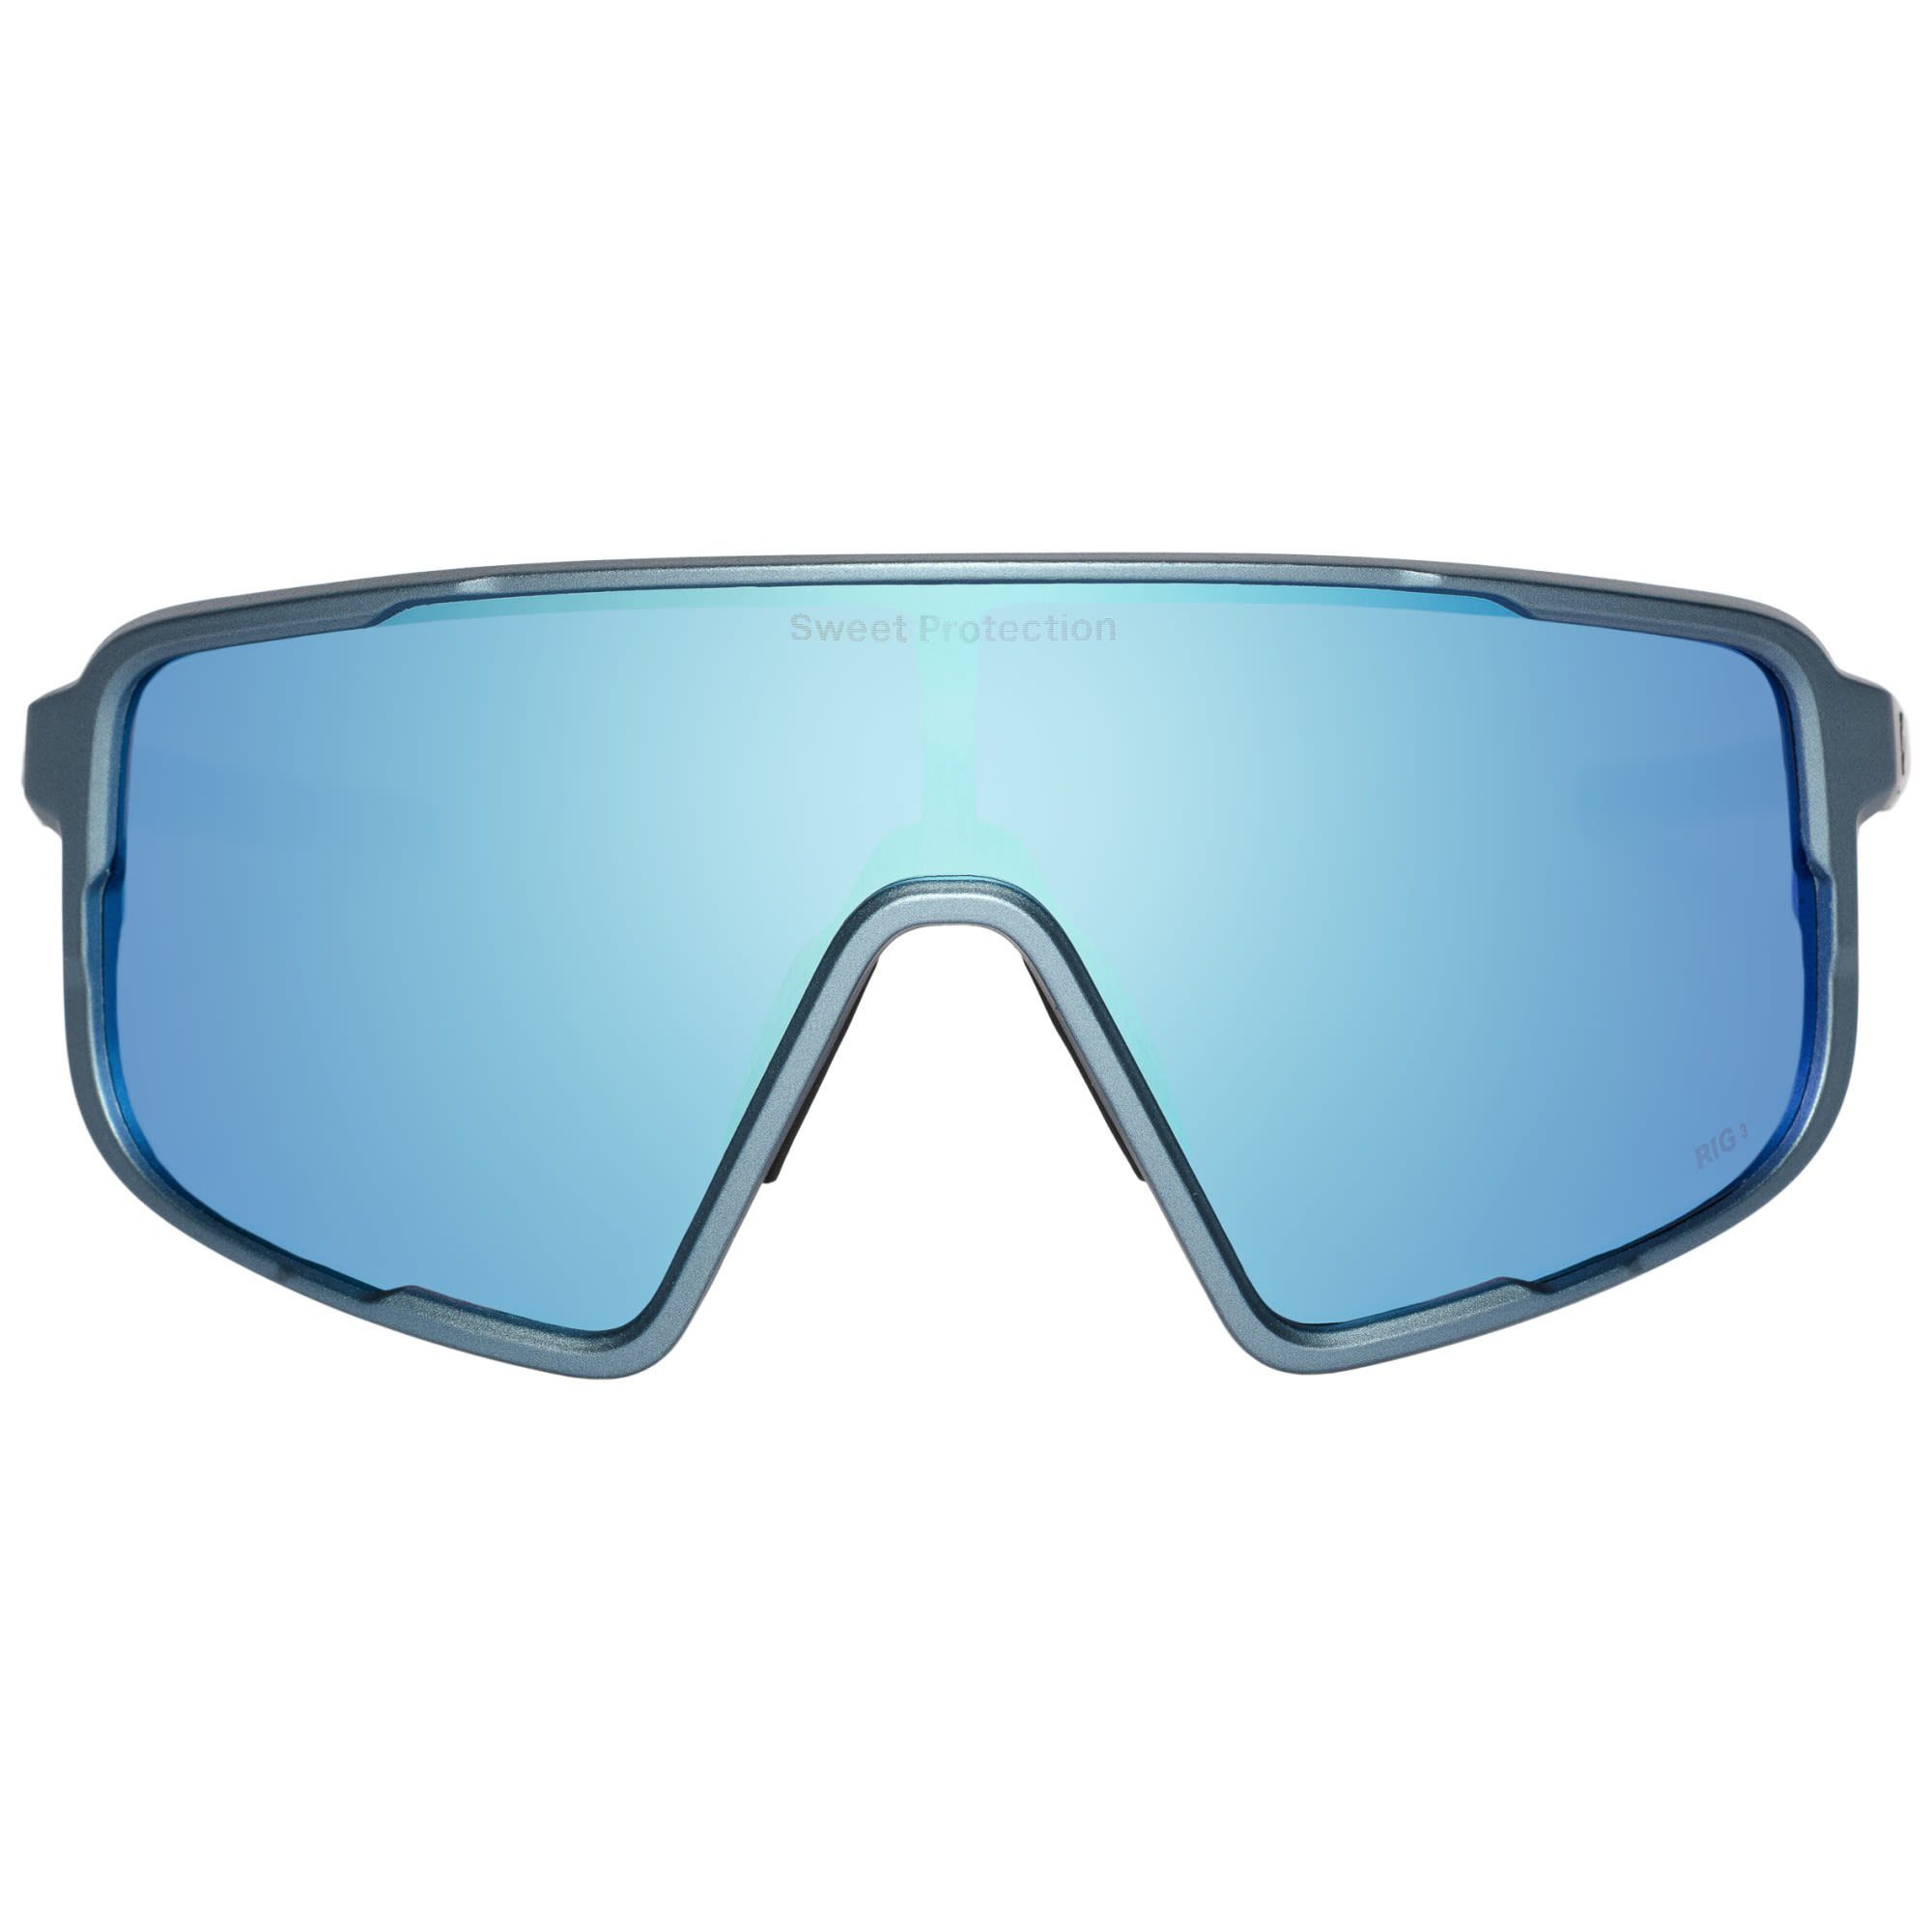 Reflect Sweet - Protection Sportbrille Memento Metallic Aquamarine Flare Rig Accessoires Sweet RIG Protection